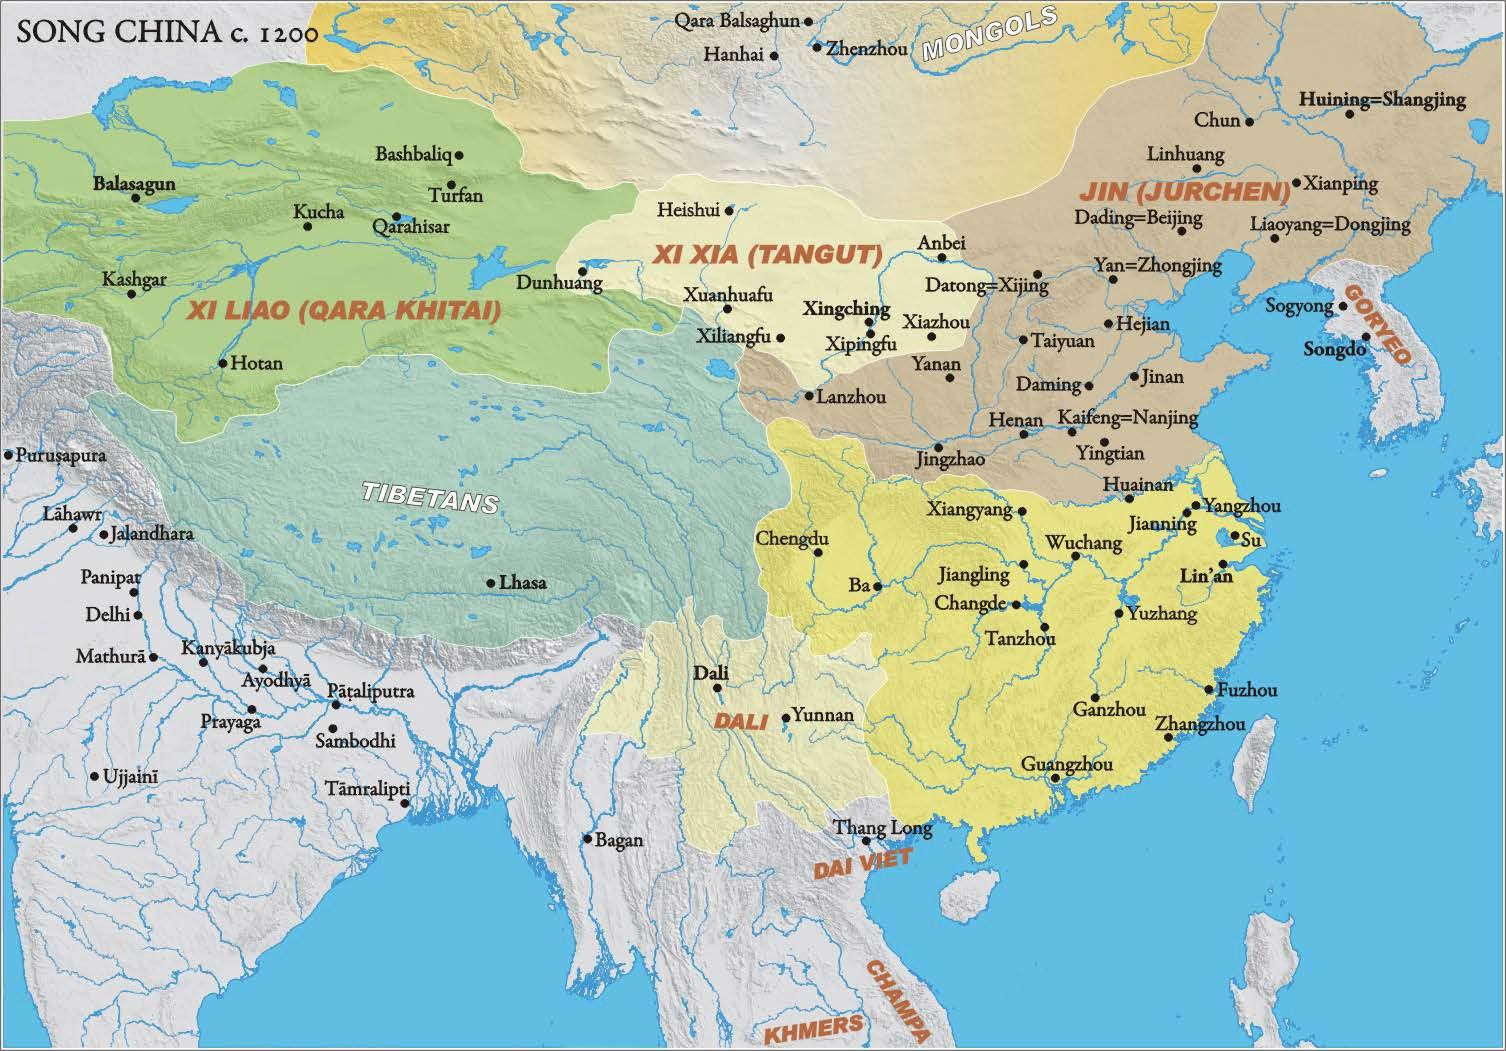 Map of China during the Southern Song Dynasty, c. 1200 CE